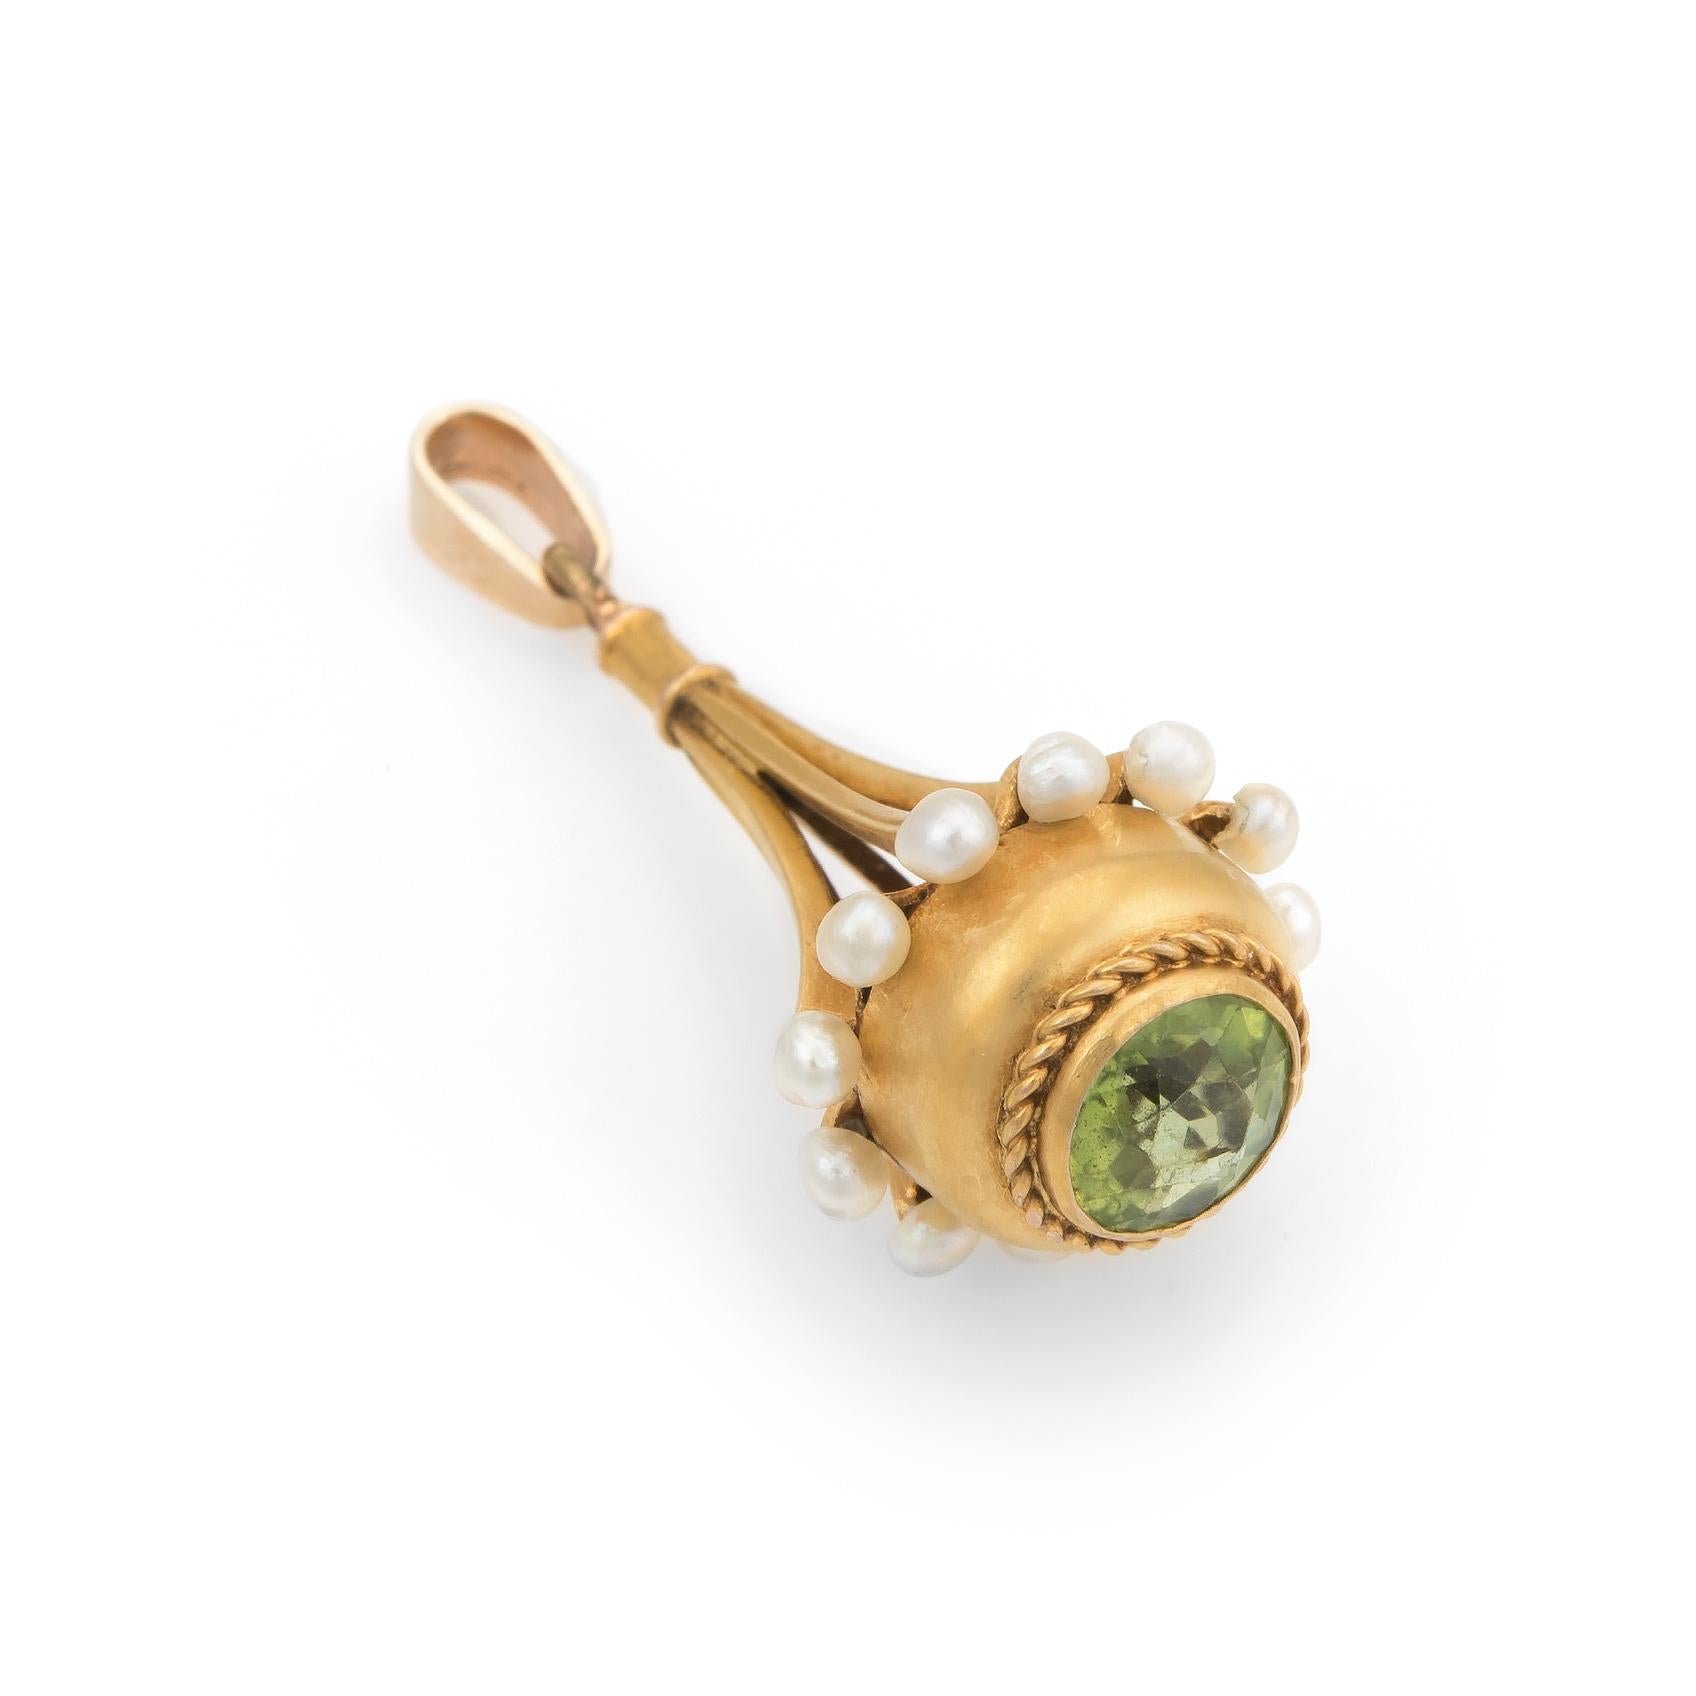 Finely detailed antique Victorian era (circa 1880s to 1900s) pendant or fob, crafted in 18 karat yellow gold. 

The pendant is set with a 6mm round faceted peridot (estimated at 1 carat), accented with 12 x 2mm seed pearls. The seed pearls are